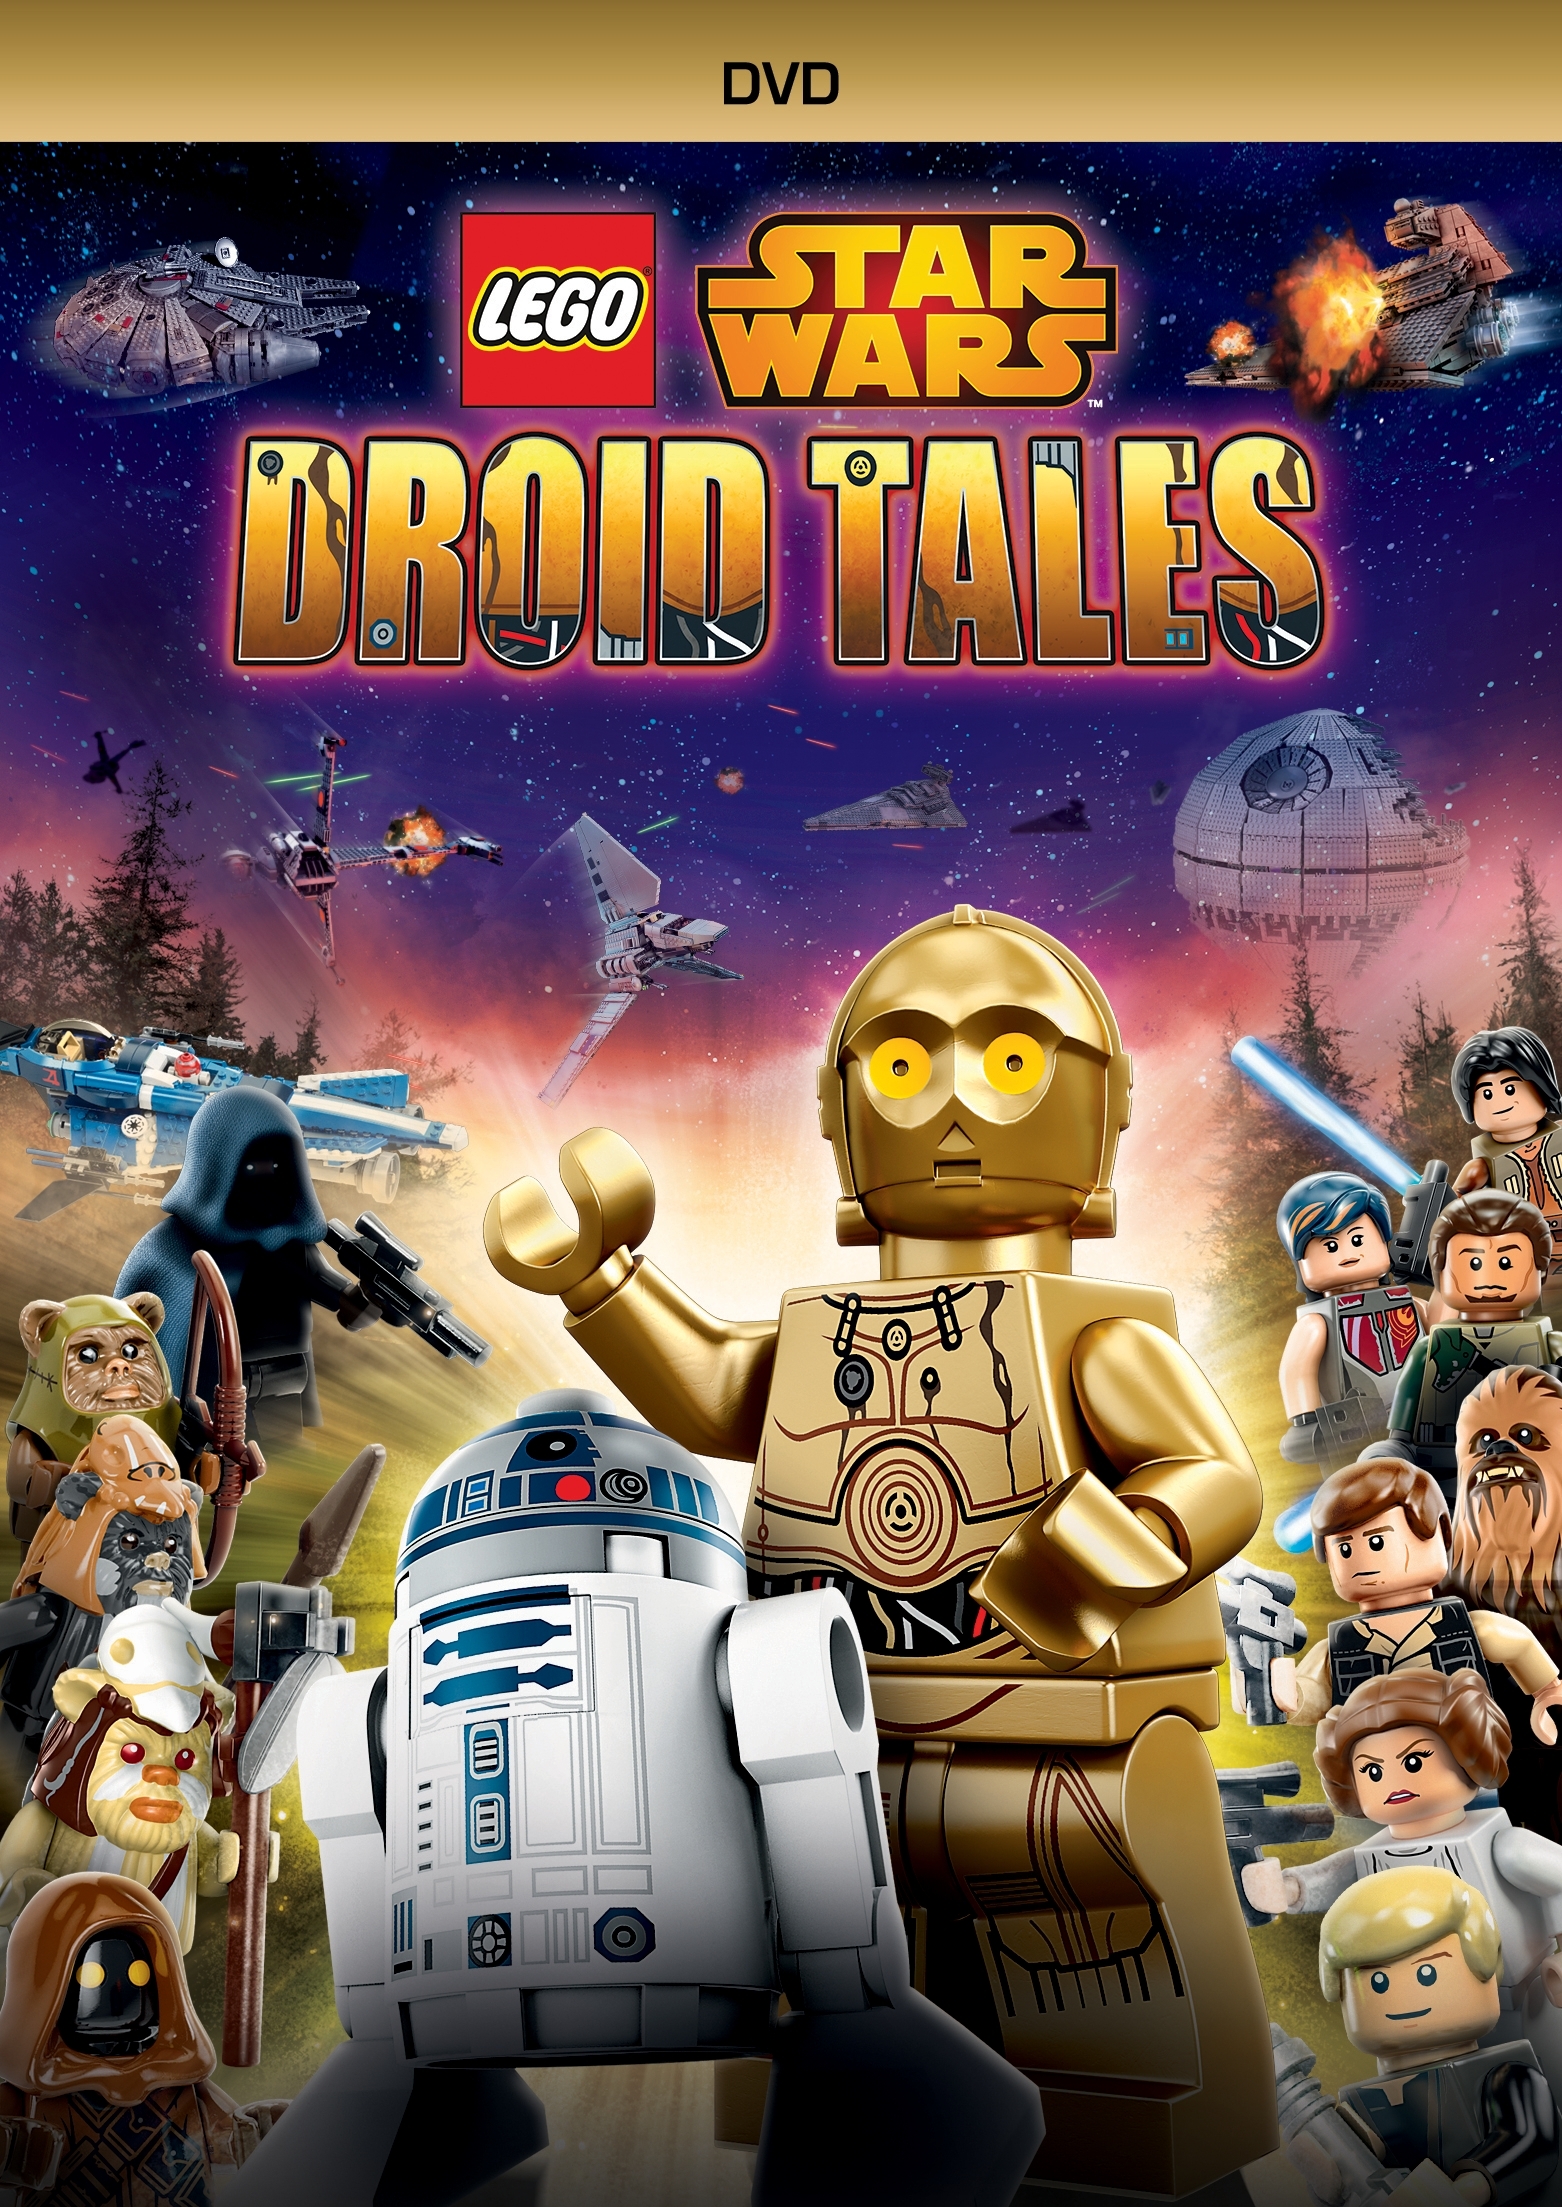 star wars droids complete series dvd